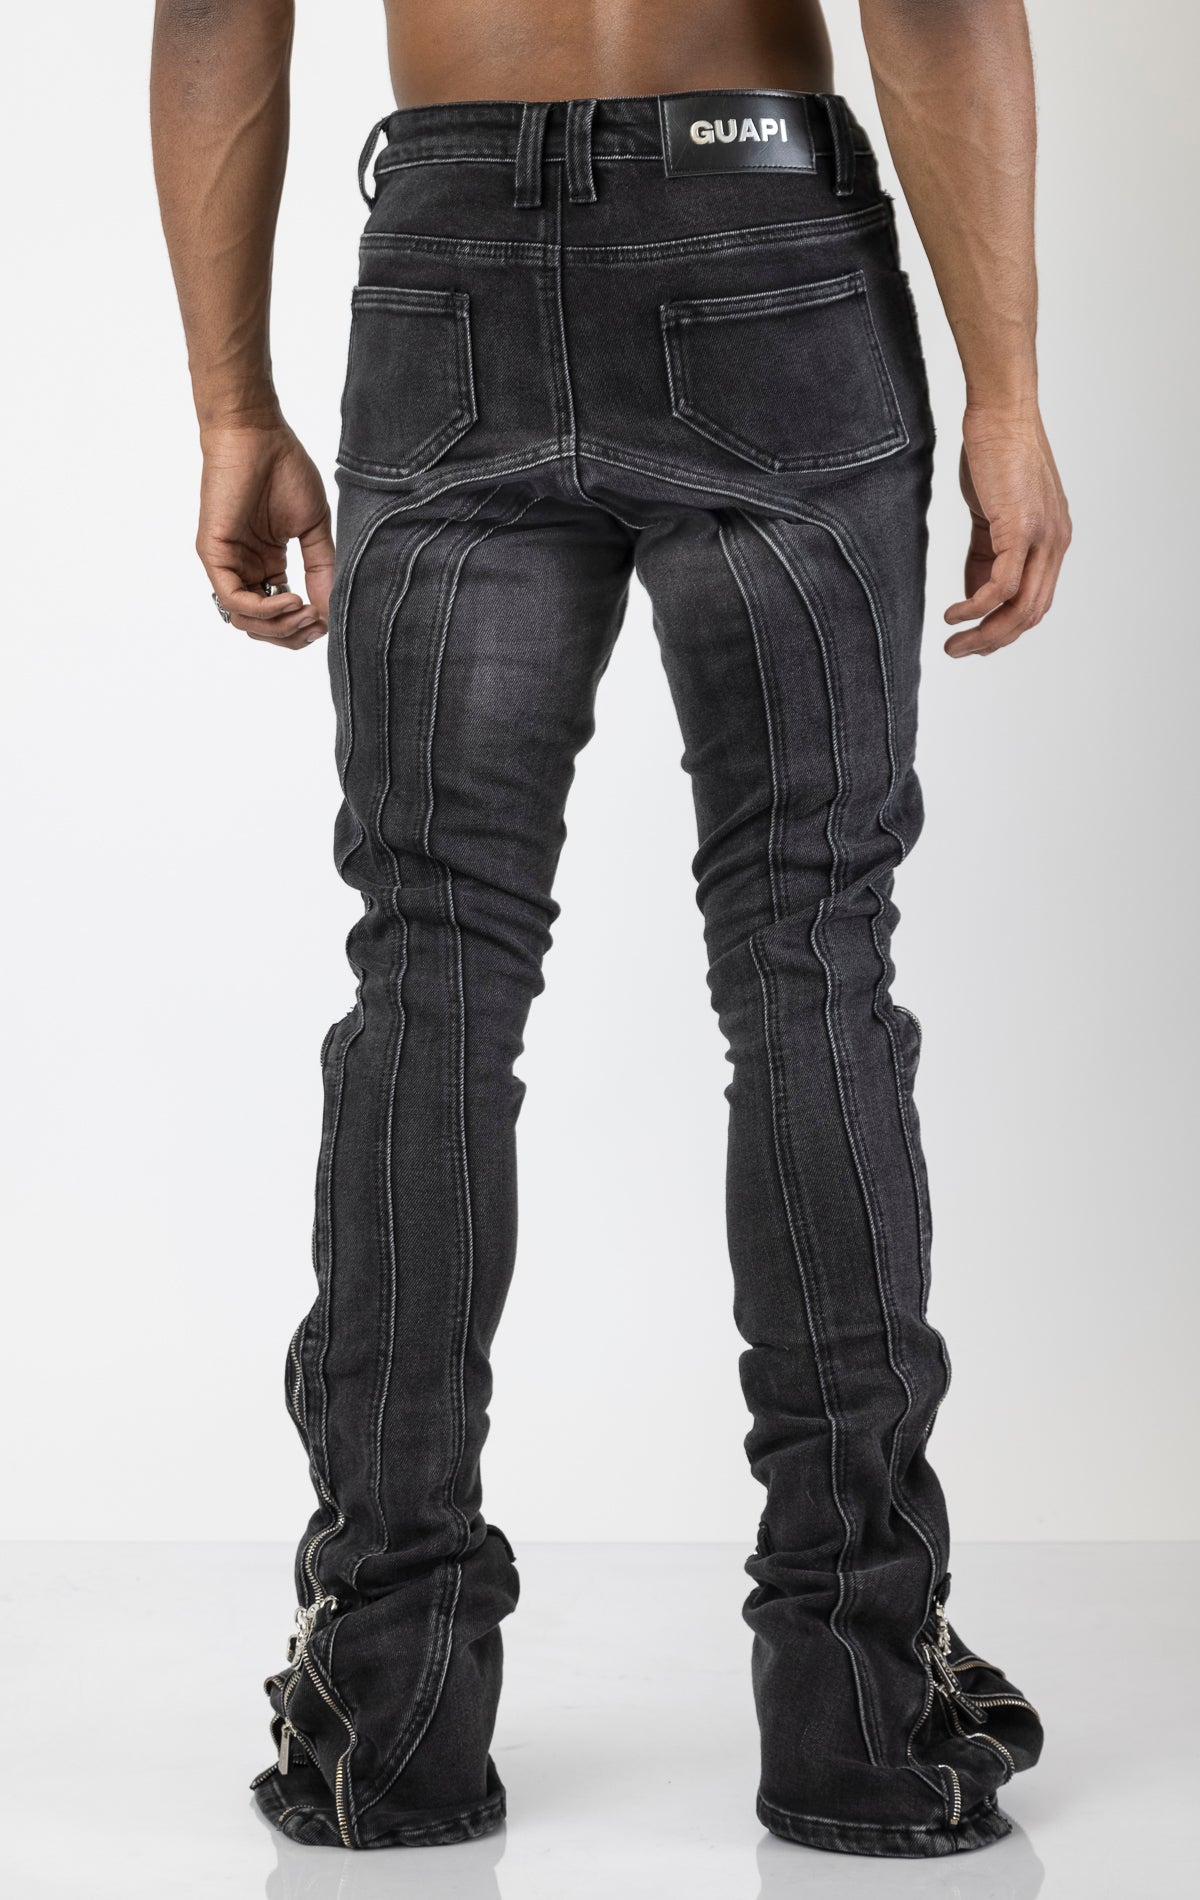 Men's black jeans with a unique stacked iron chain hardware embellishments at the ankle. The jeans have a skinny fit (size up for a more relaxed fit)